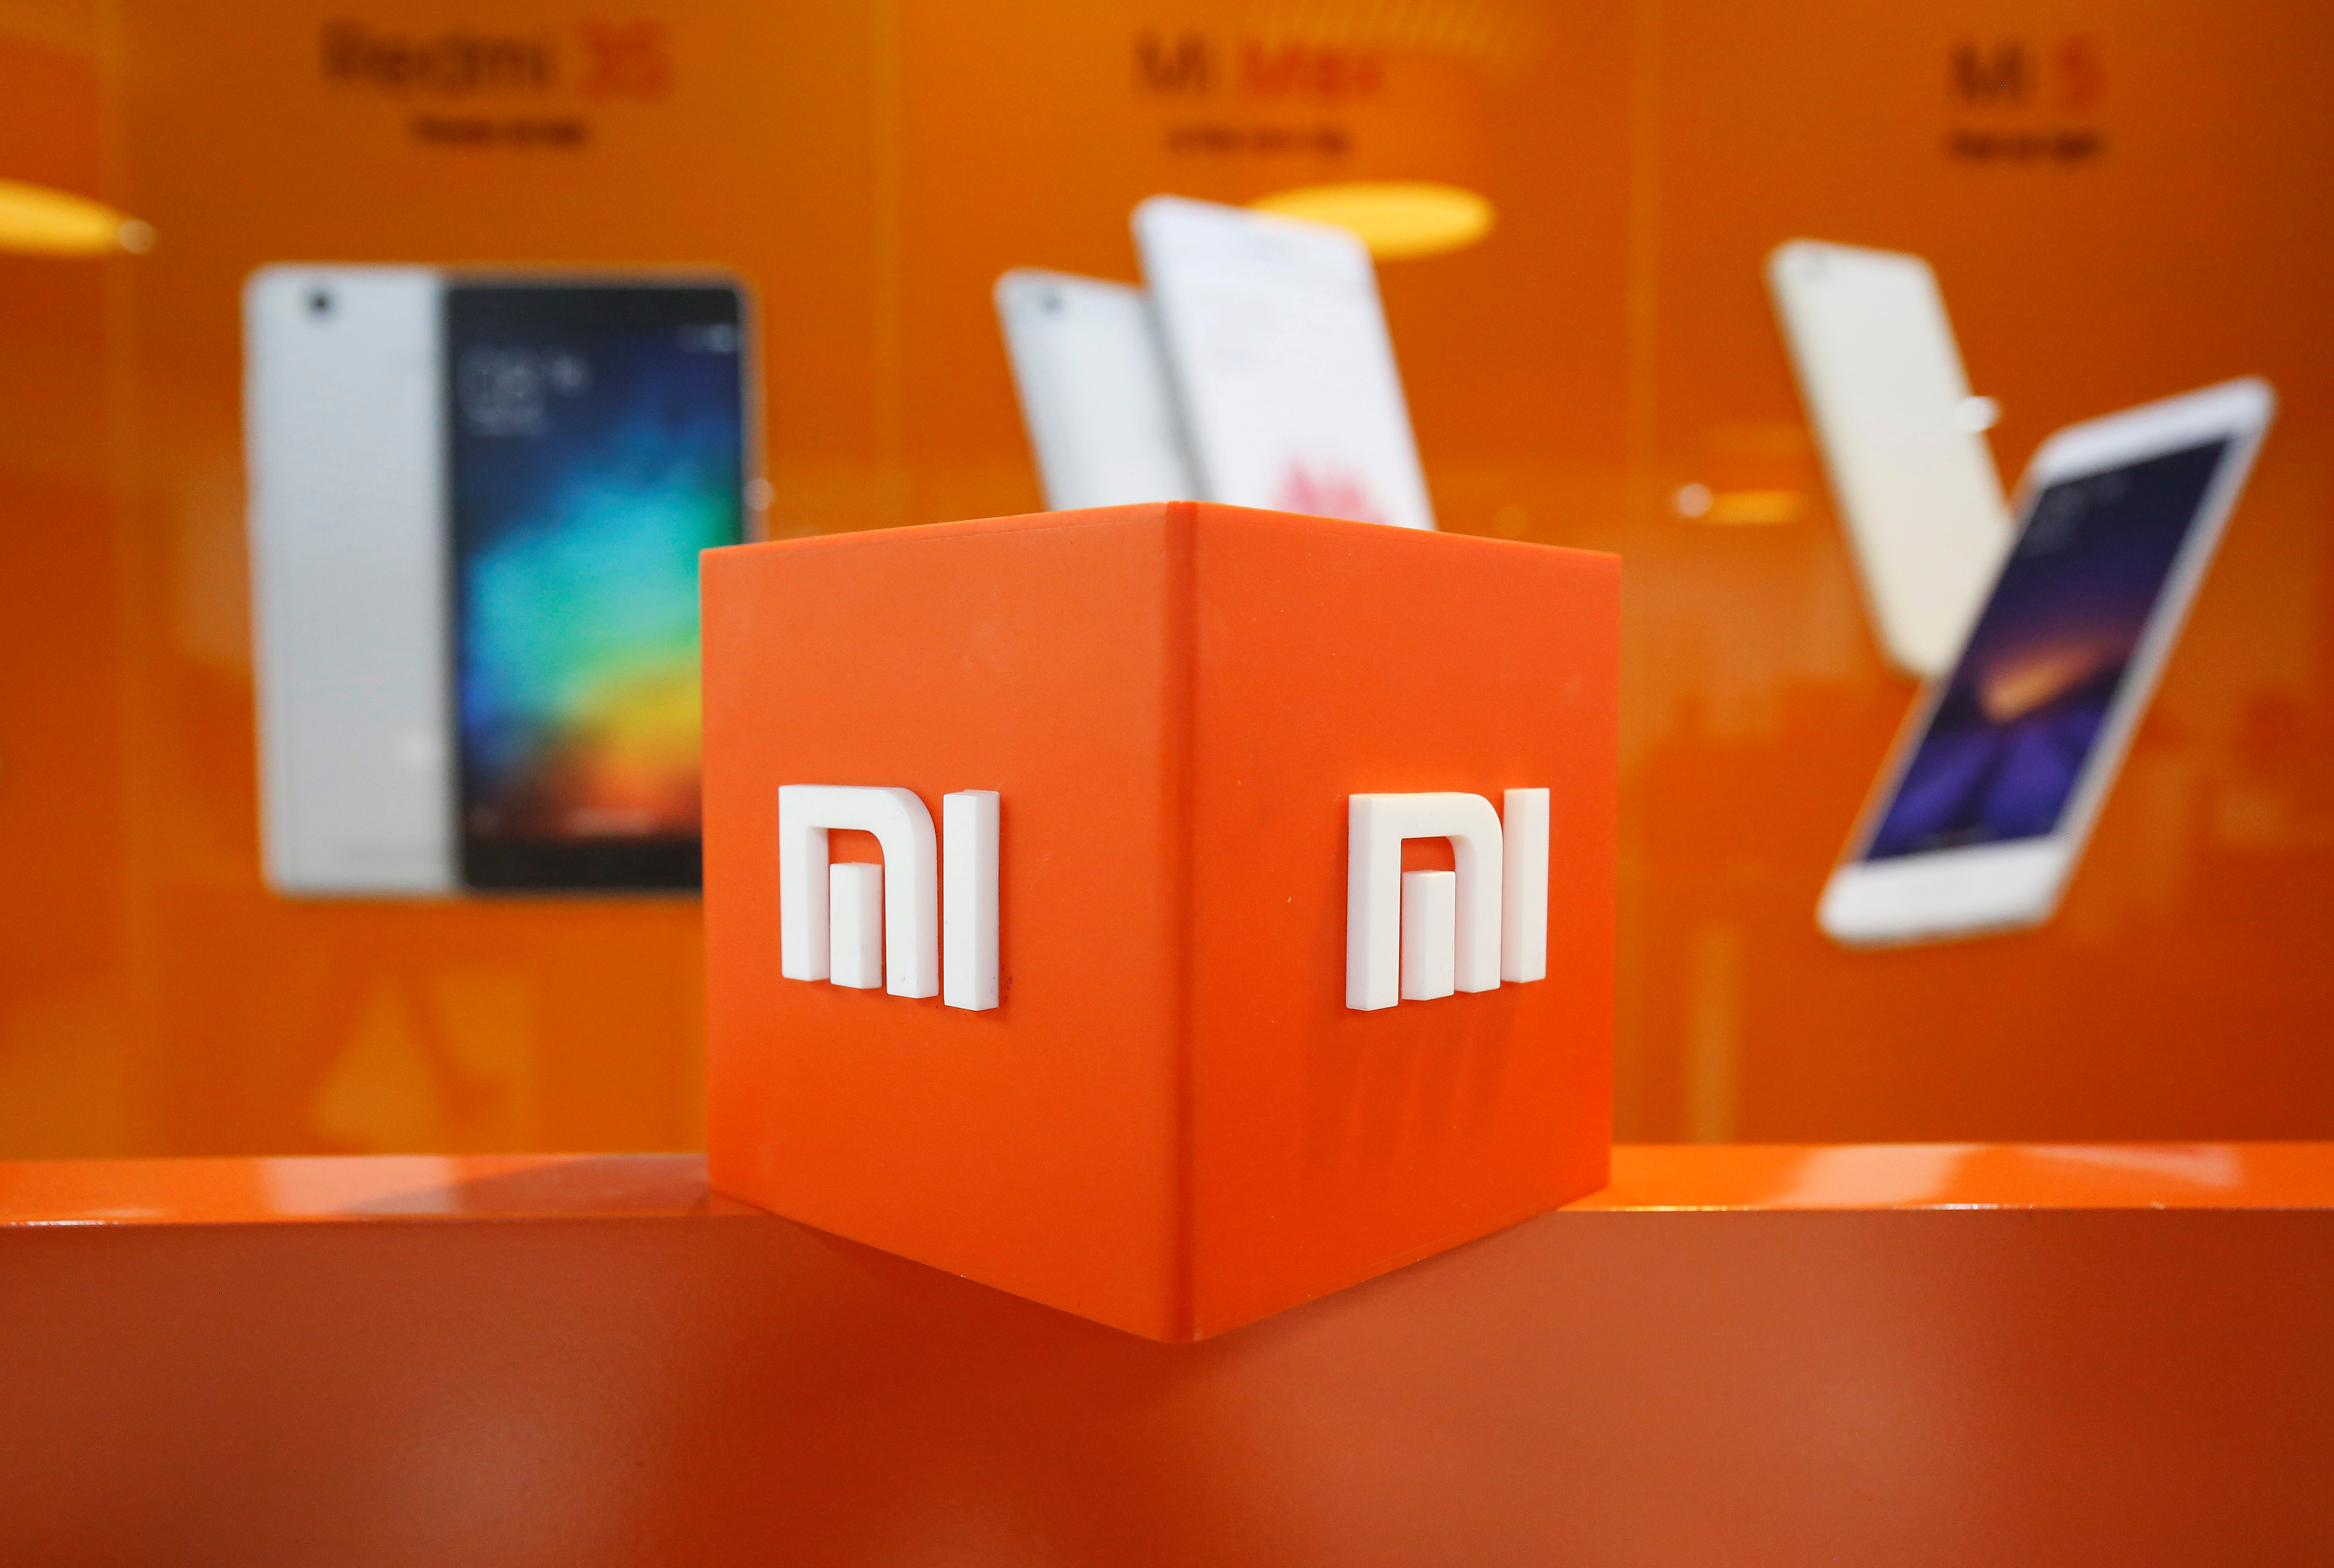 The logo of Xiaomi is seen inside the company's office in Bengaluru, India, January 18, 2018. Picture taken January 18, 2018. REUTERS/Abhishek N. Chinnappa/File Photo